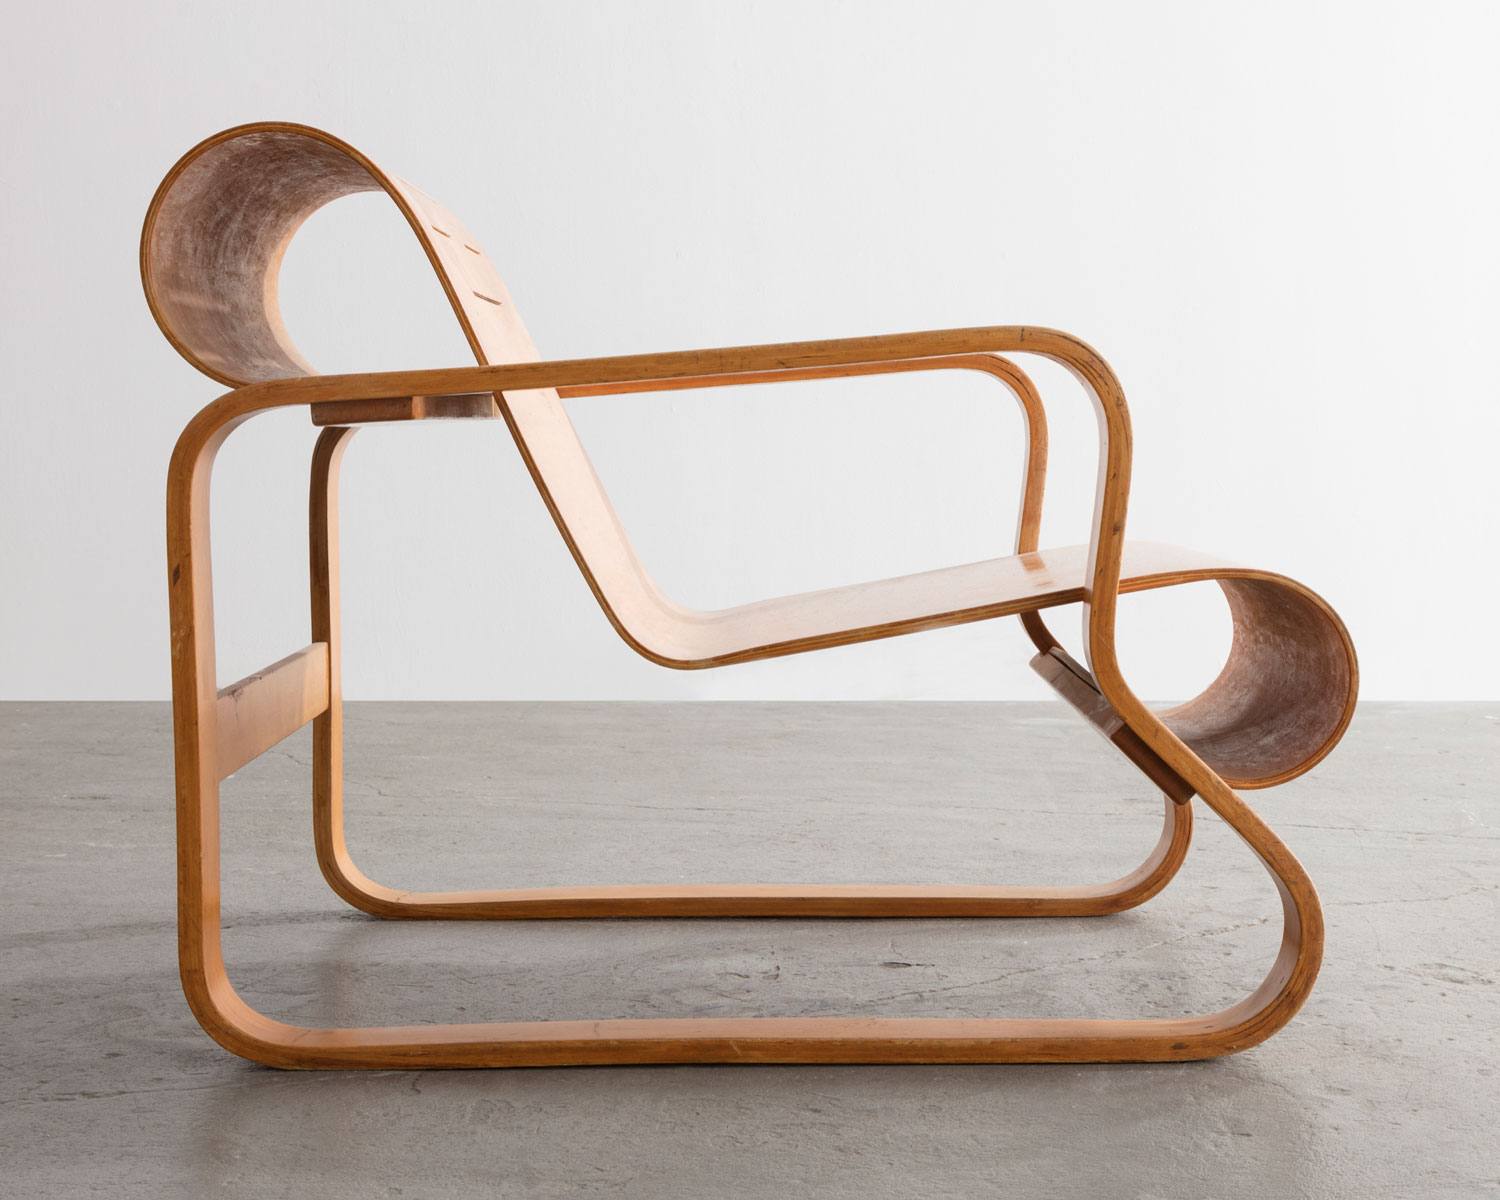 A chair designed by Alvar Aalto.